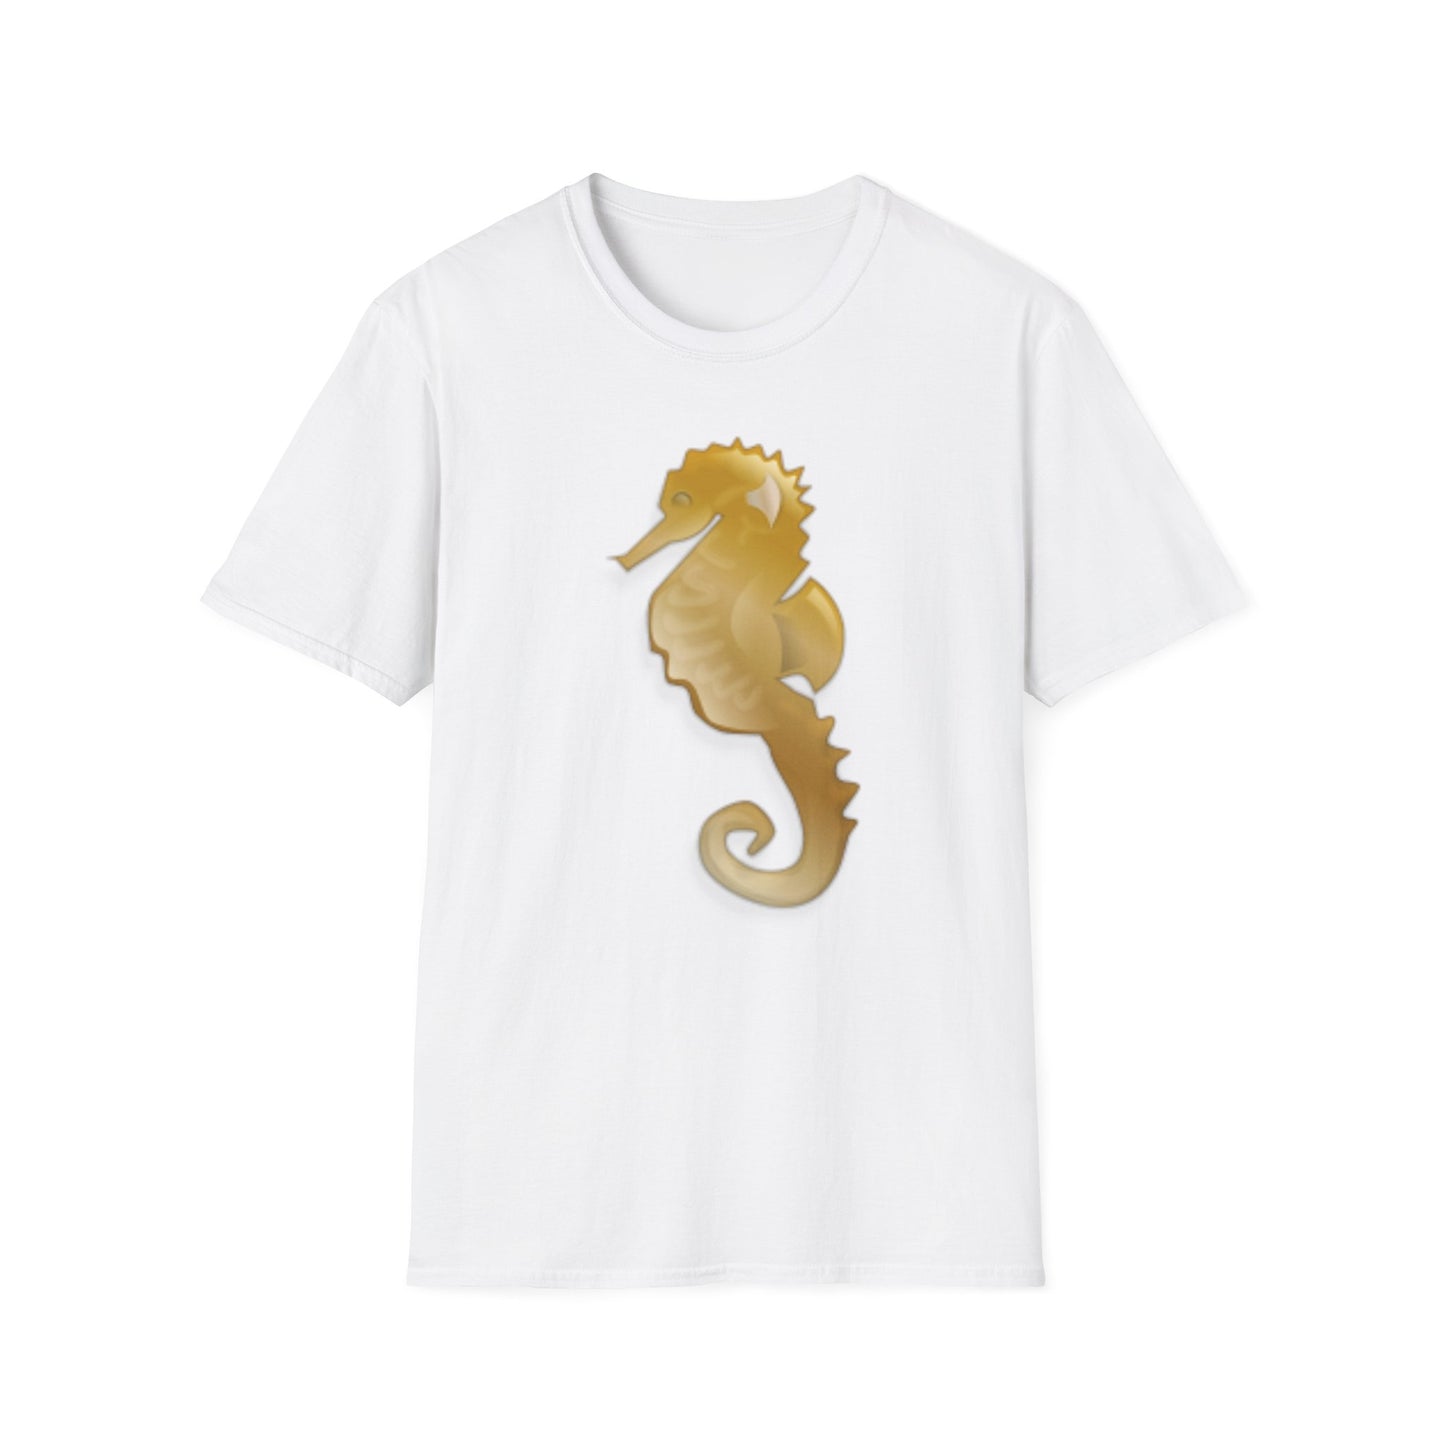 A white t-shirt with a design of a golden seahorse